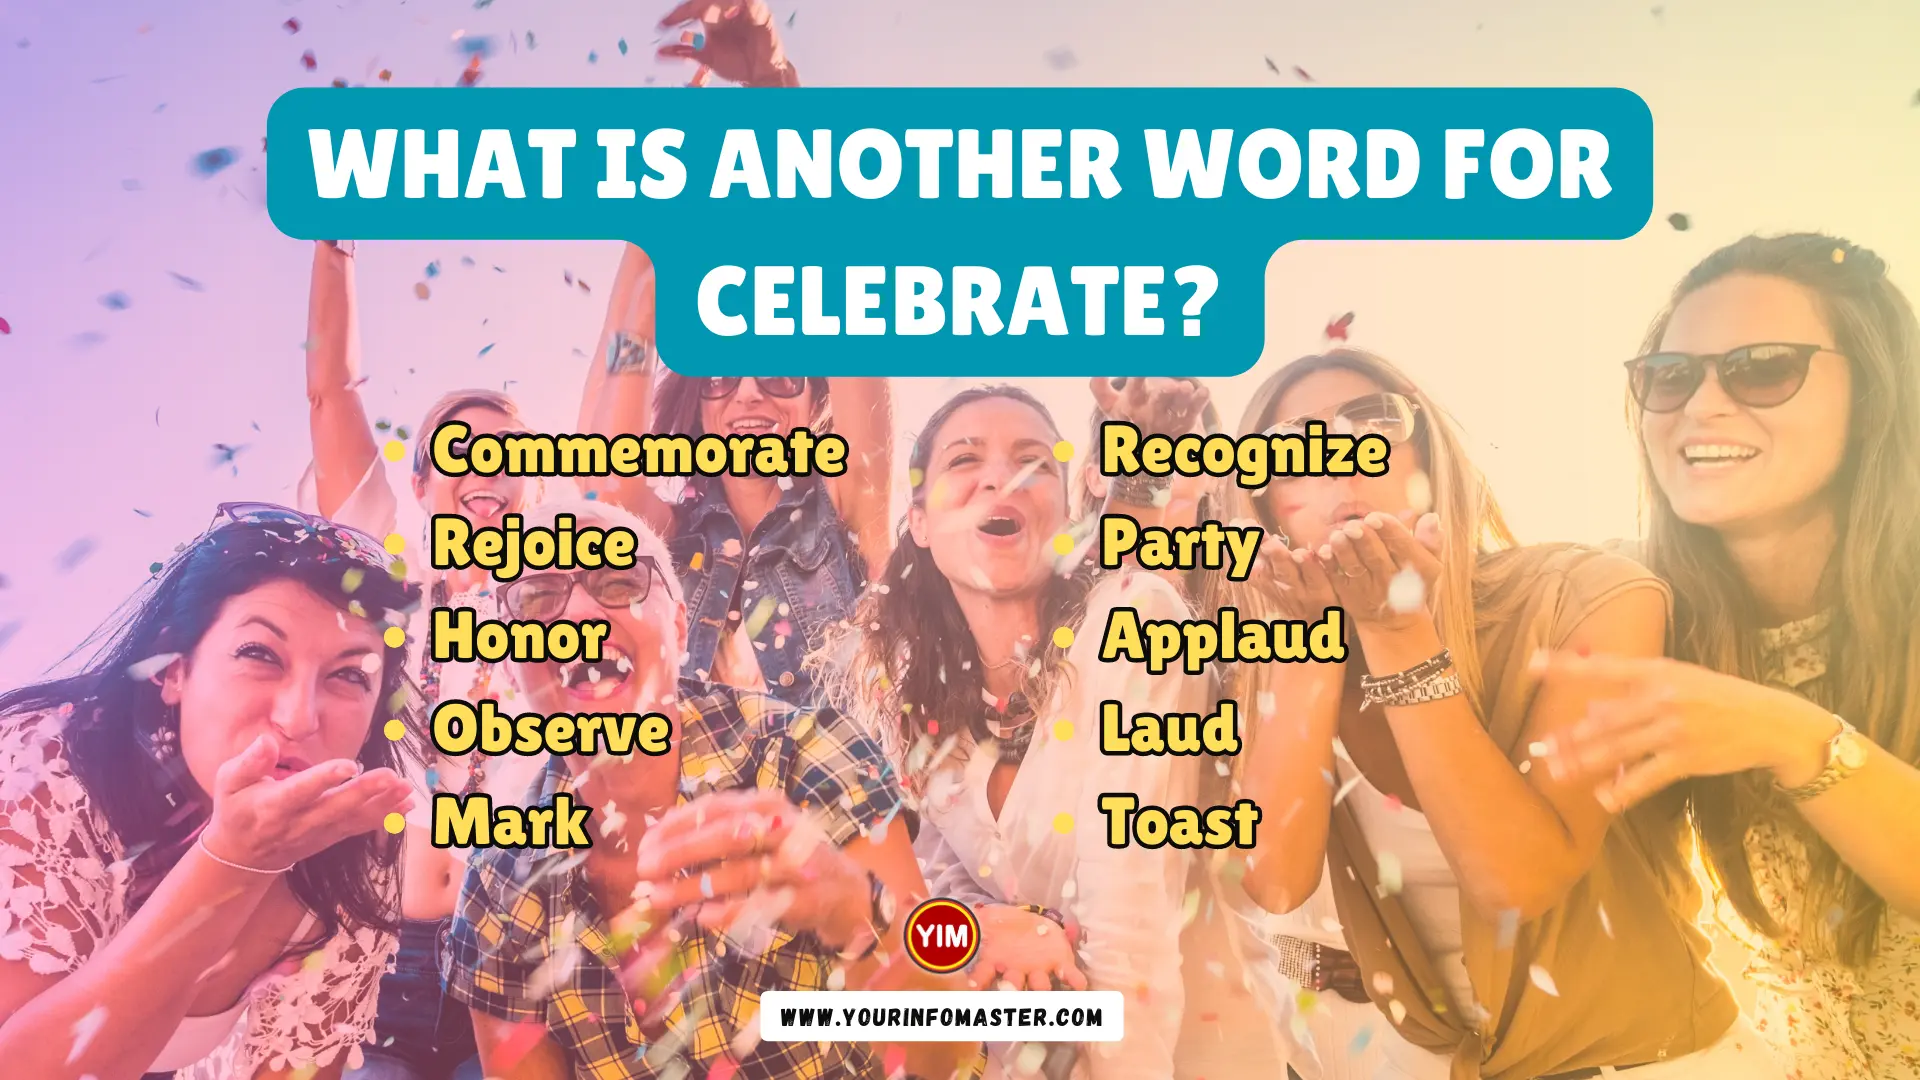 What is another word for Celebrate